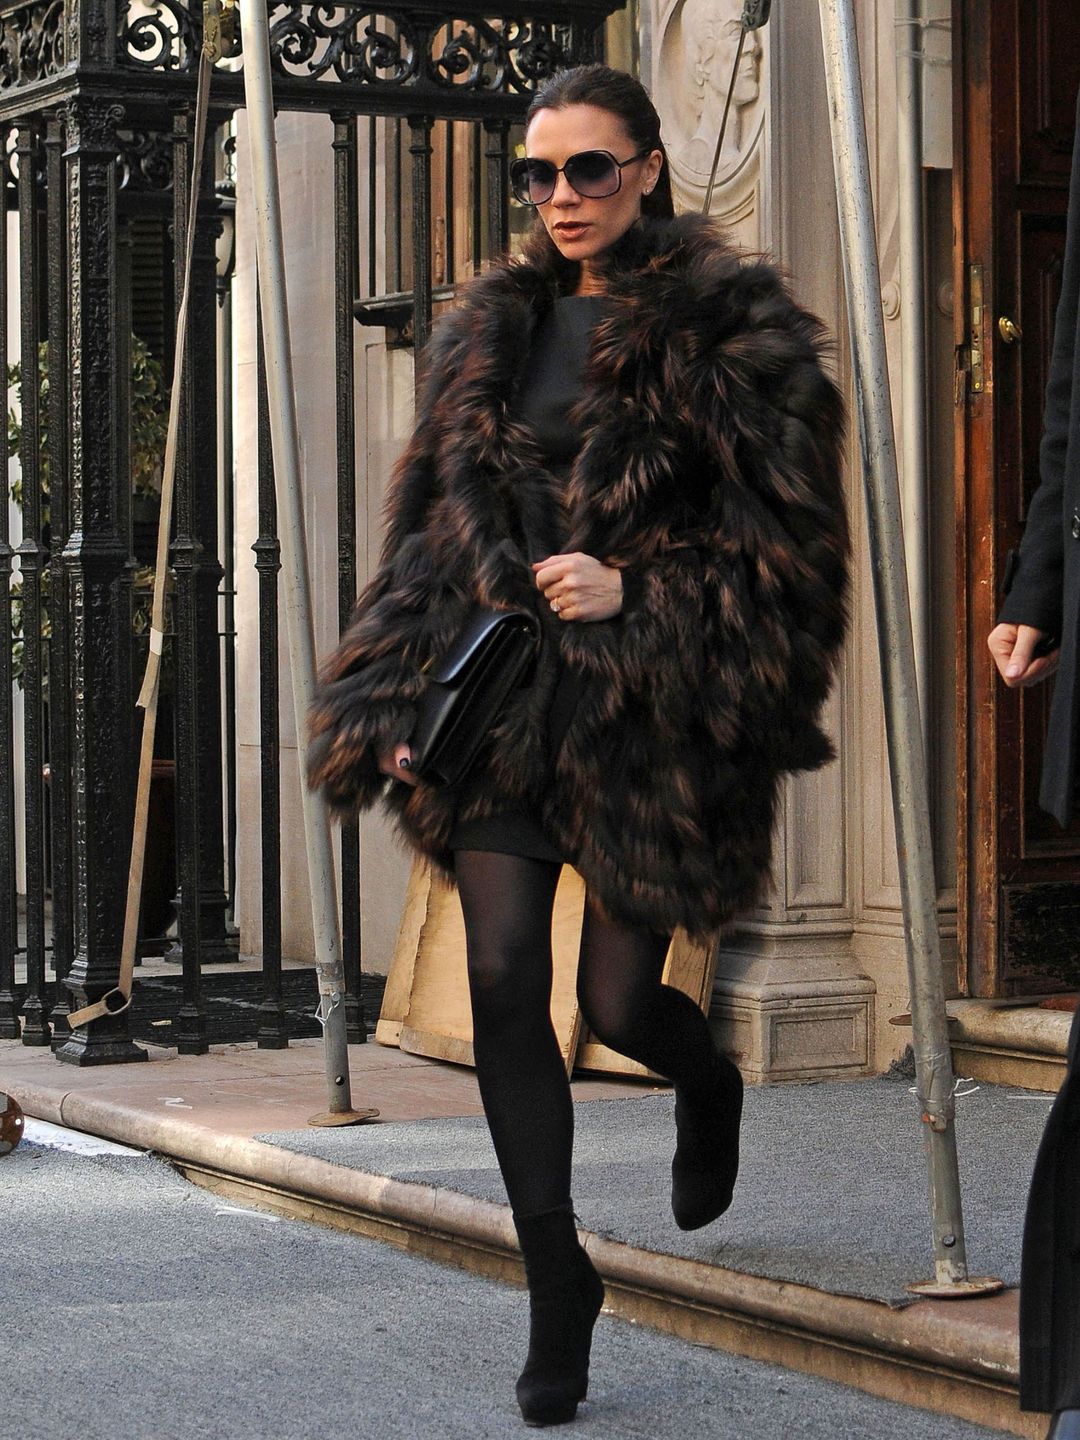 NEW YORK, NY - FEBRUARY 13: Victoria Beckham is seen on February 13, 2011 in New York City.  (Photo by Gardiner Anderson/Bauer-Griffin/GC Images)